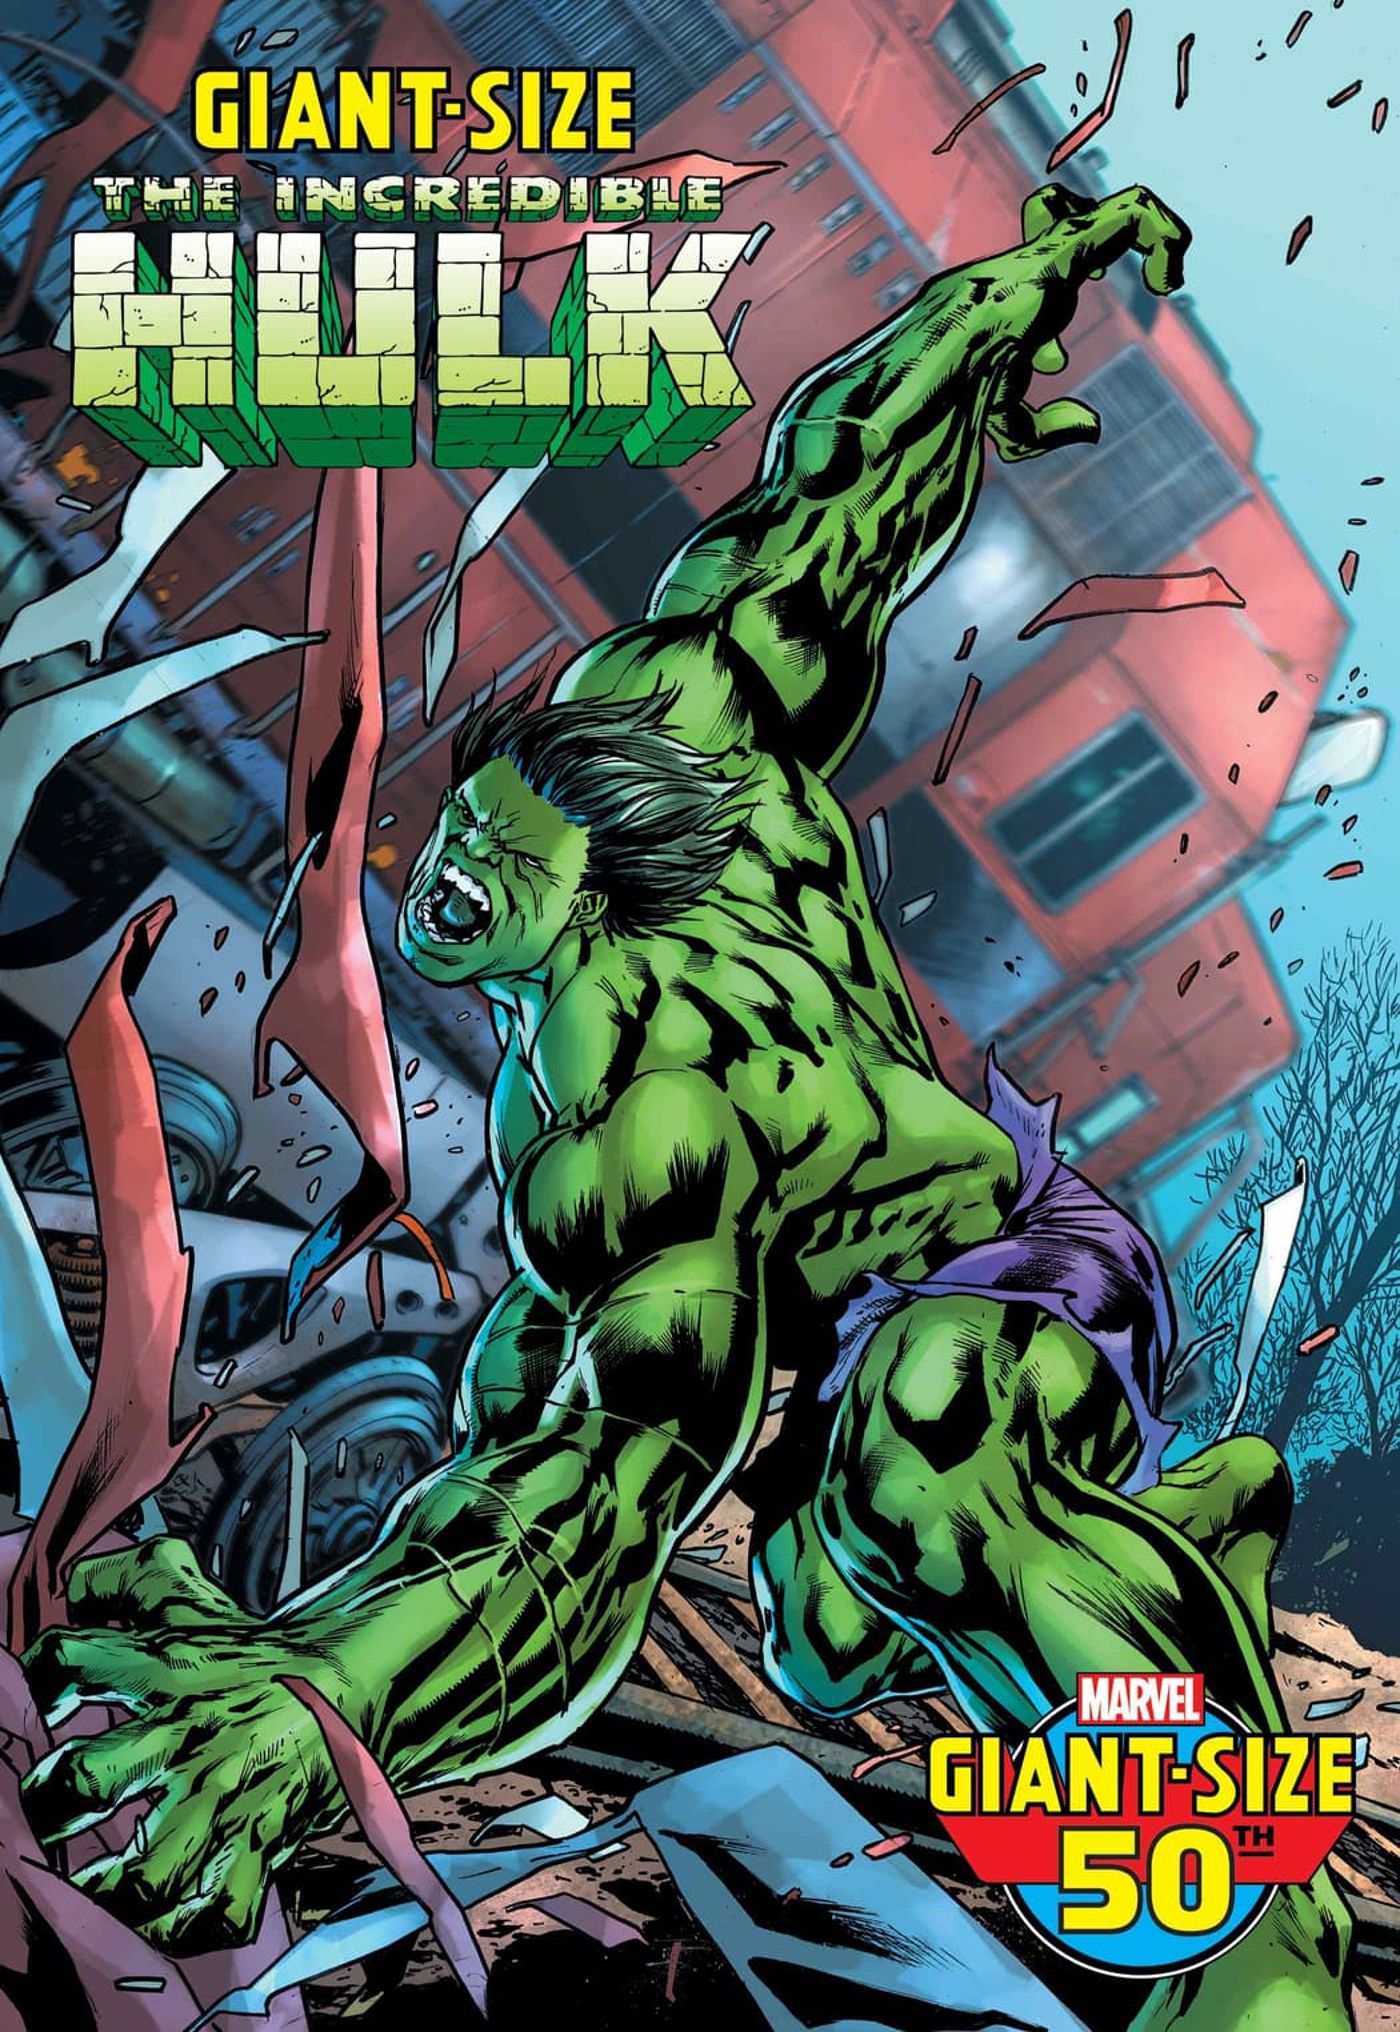 “No Hulk Fan Will Want to Miss This”: Hulk vs Patchwork Jack Promises His Biggest “Horror-Driven” Fight Yet